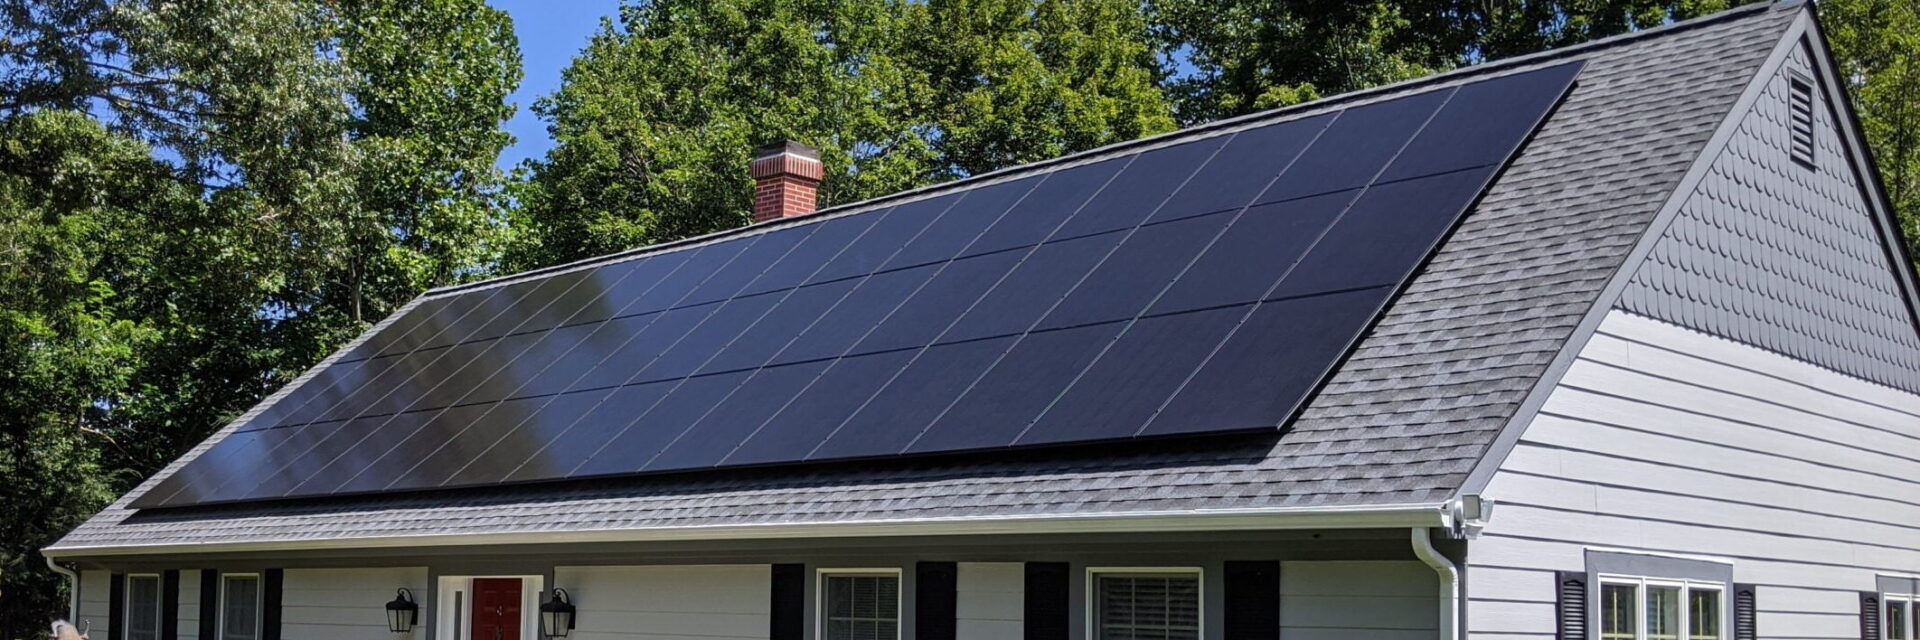 Beautiful house in Charlottesville, VA with rooftop solar.